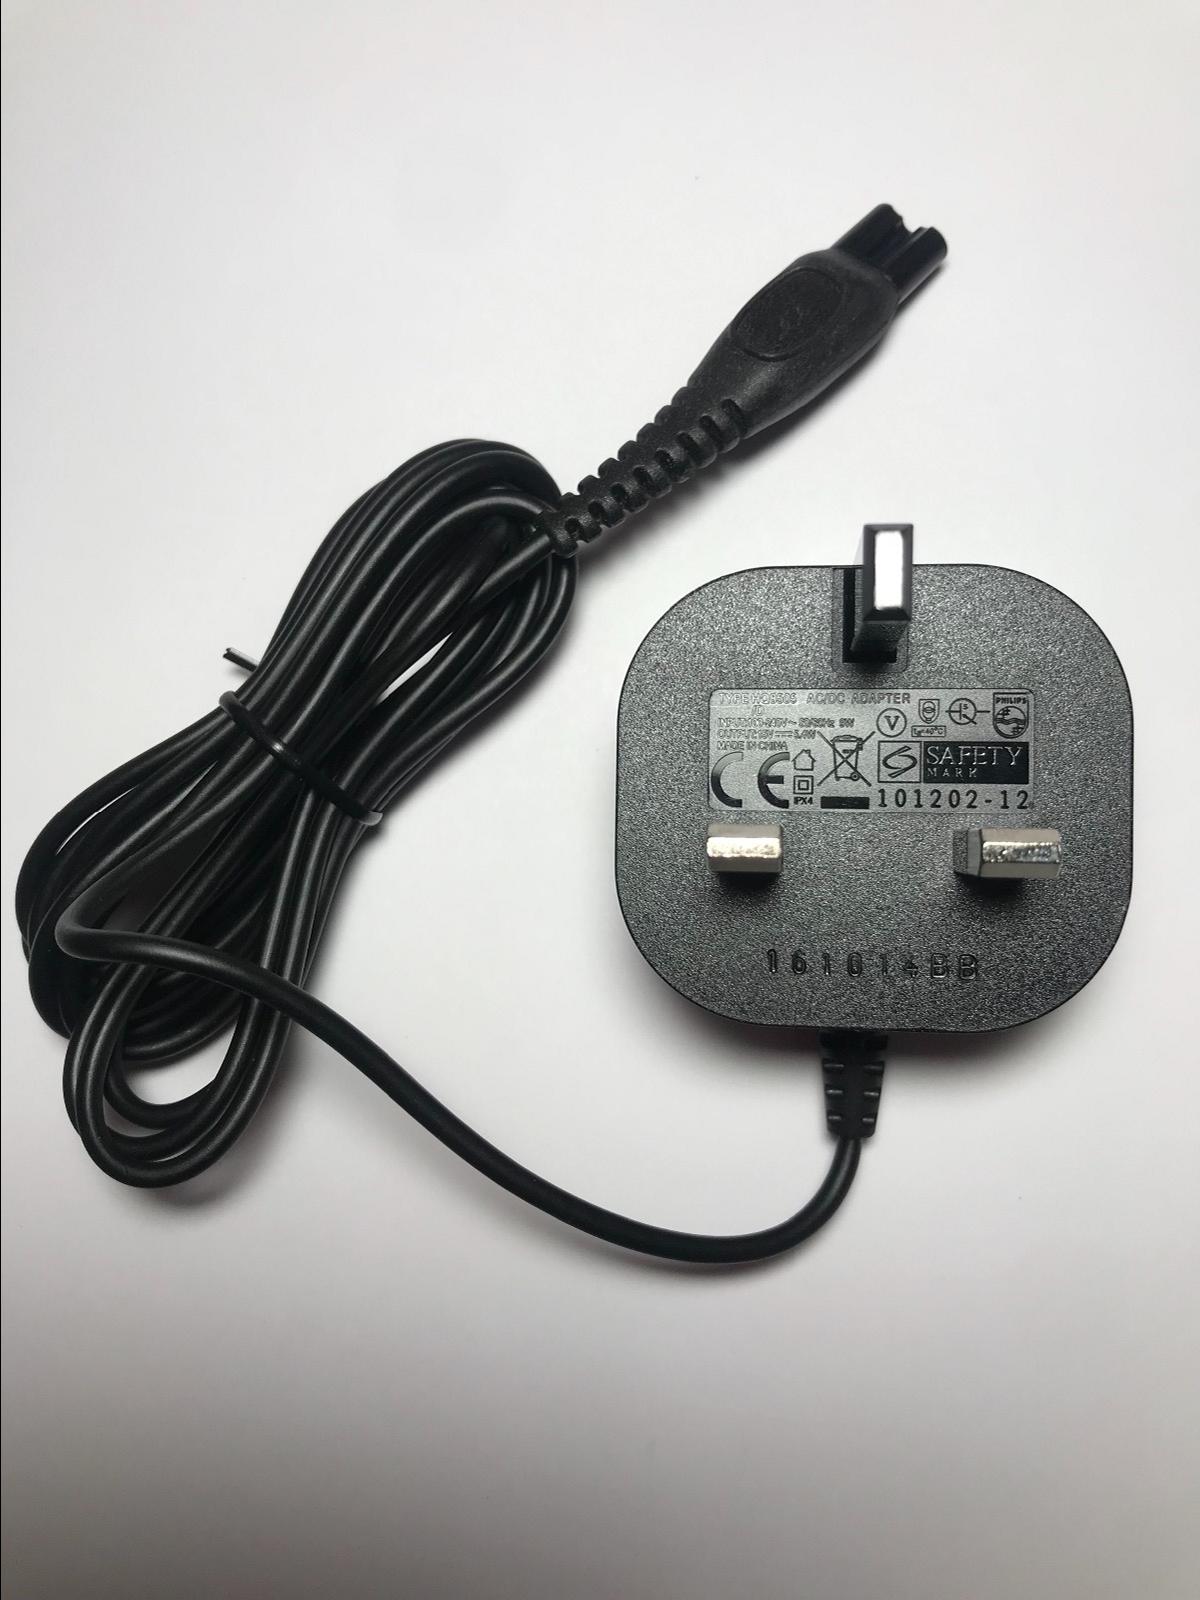 trimmer charger cable philips